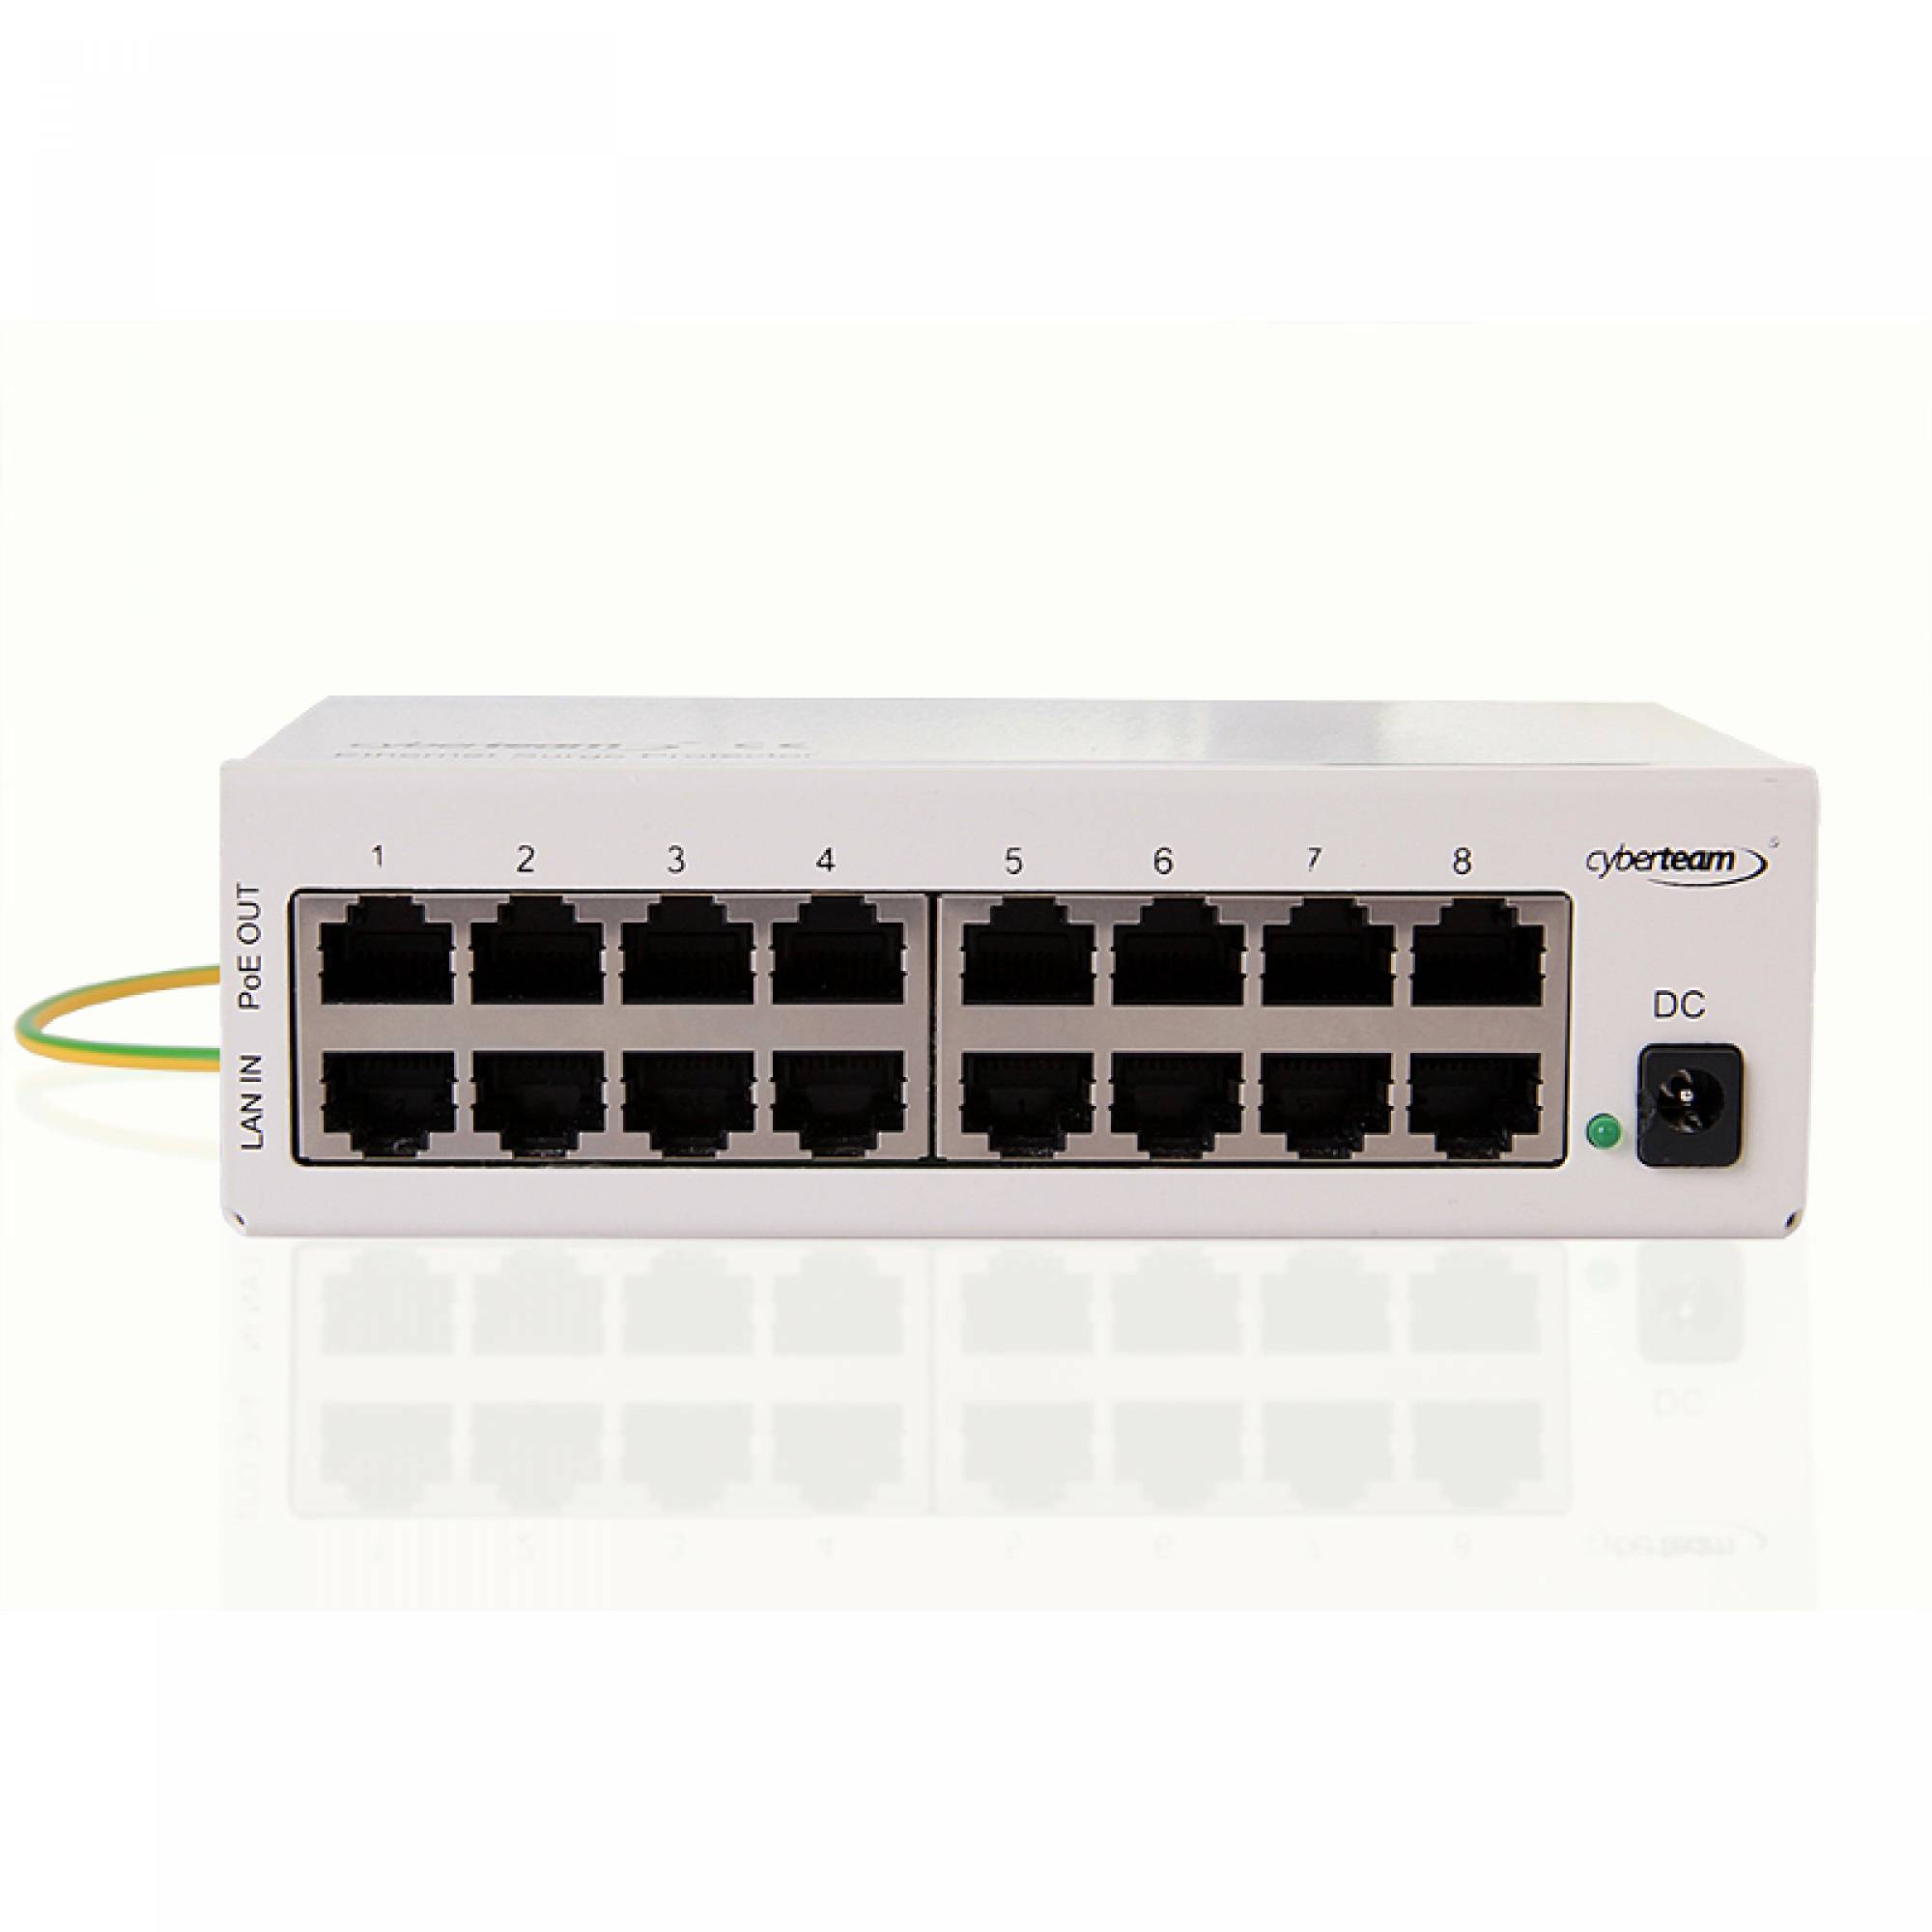 8 Port Full 8 Pin Cat6 RJ45 Ethernet Surge Protector – Fosco Connect